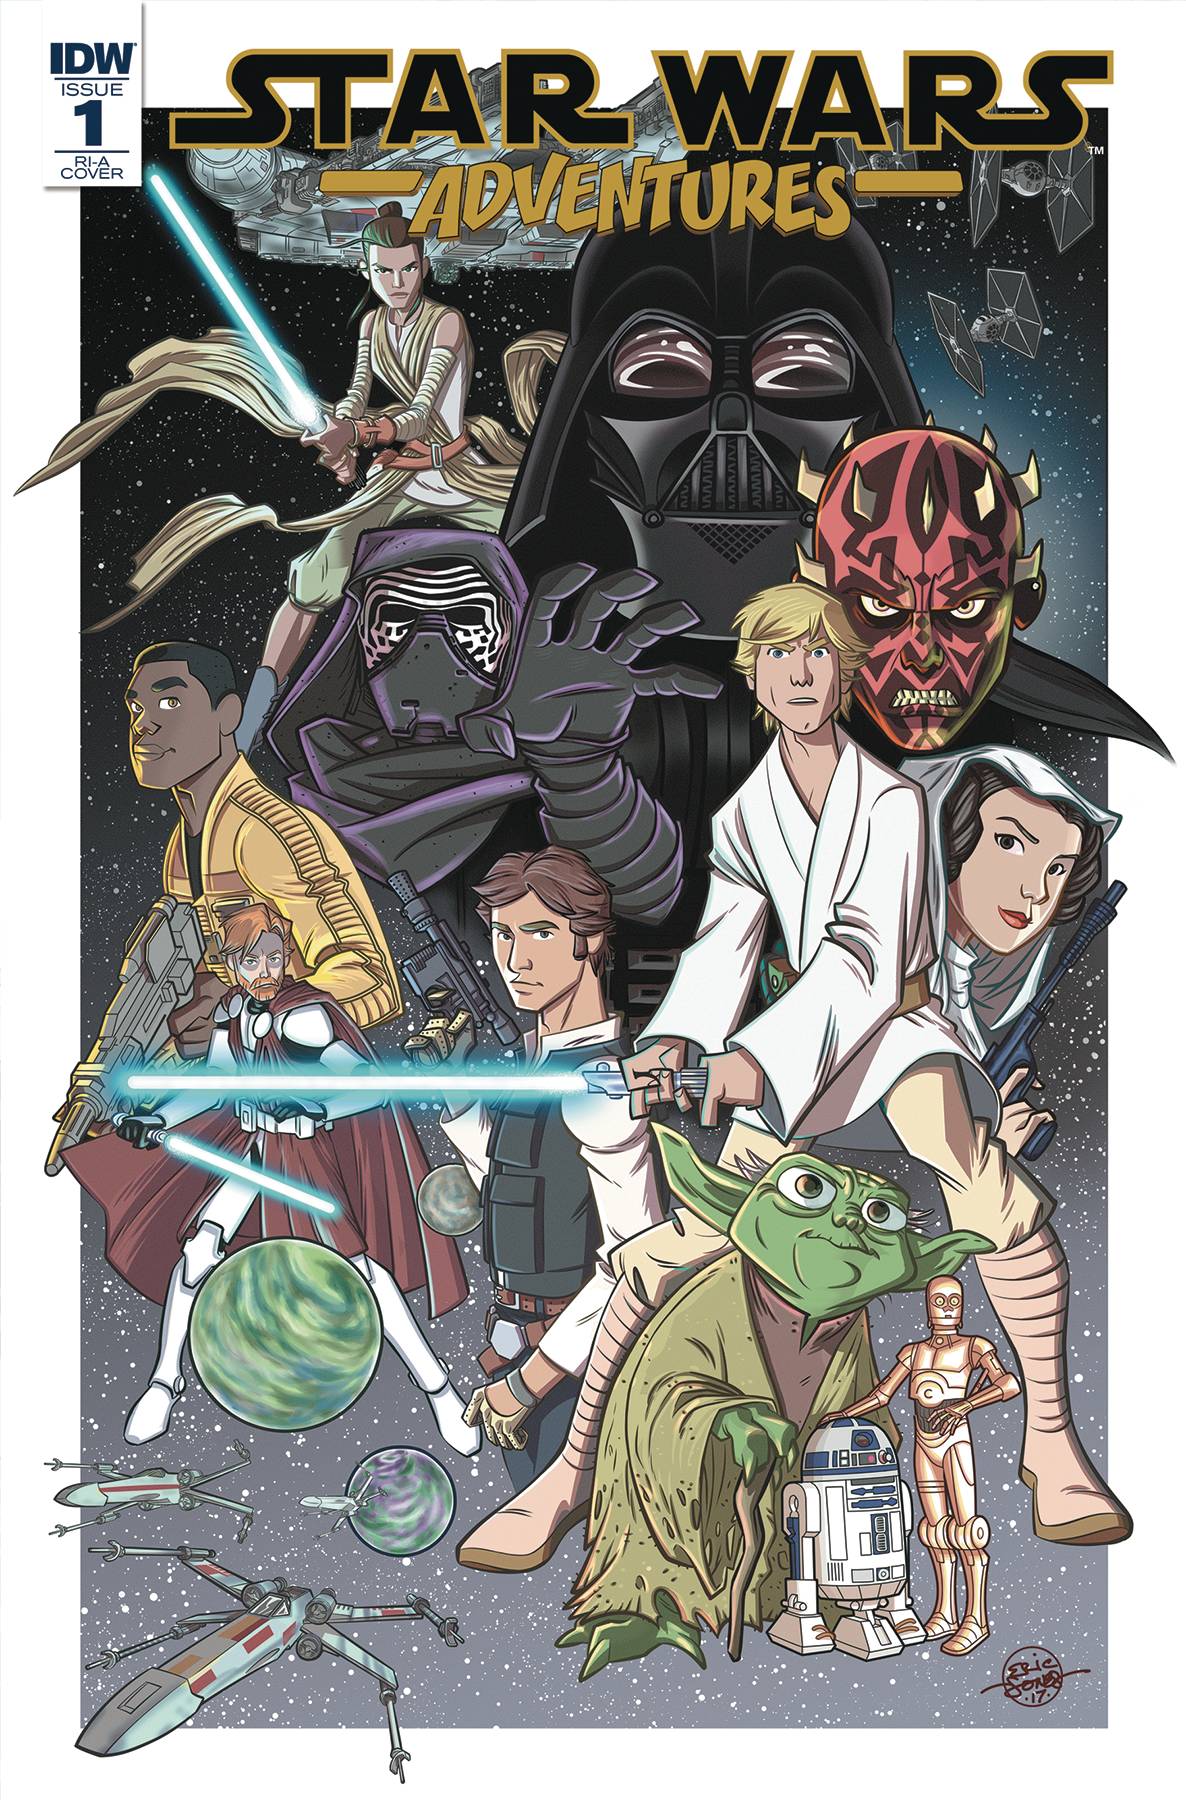 Star Wars Adventures #1 1 for 10 Incentive